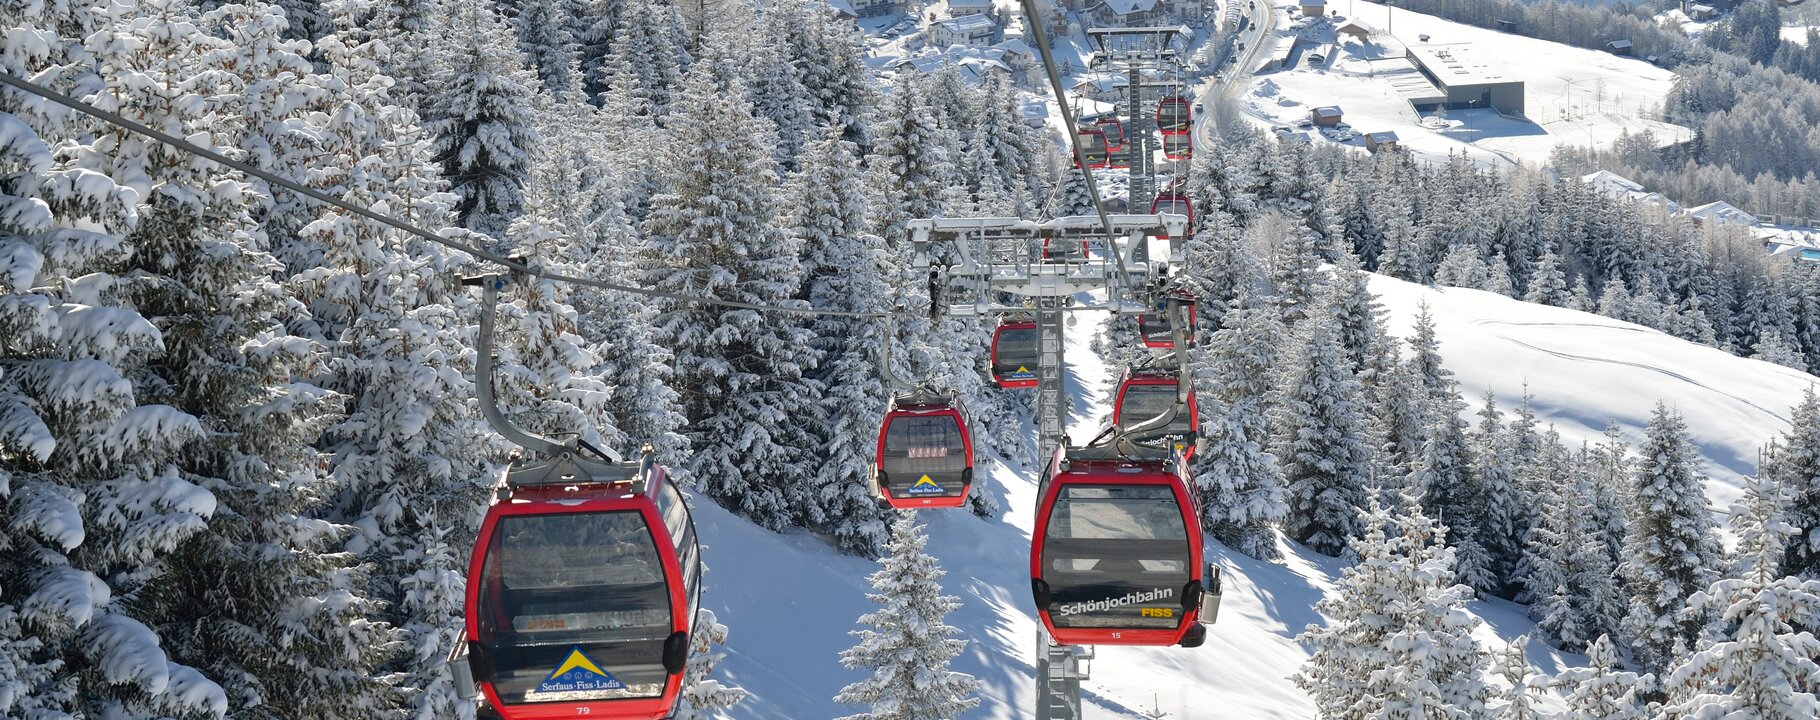 cable cars of Schönjochbahn in Serfaus-Fiss-Ladis